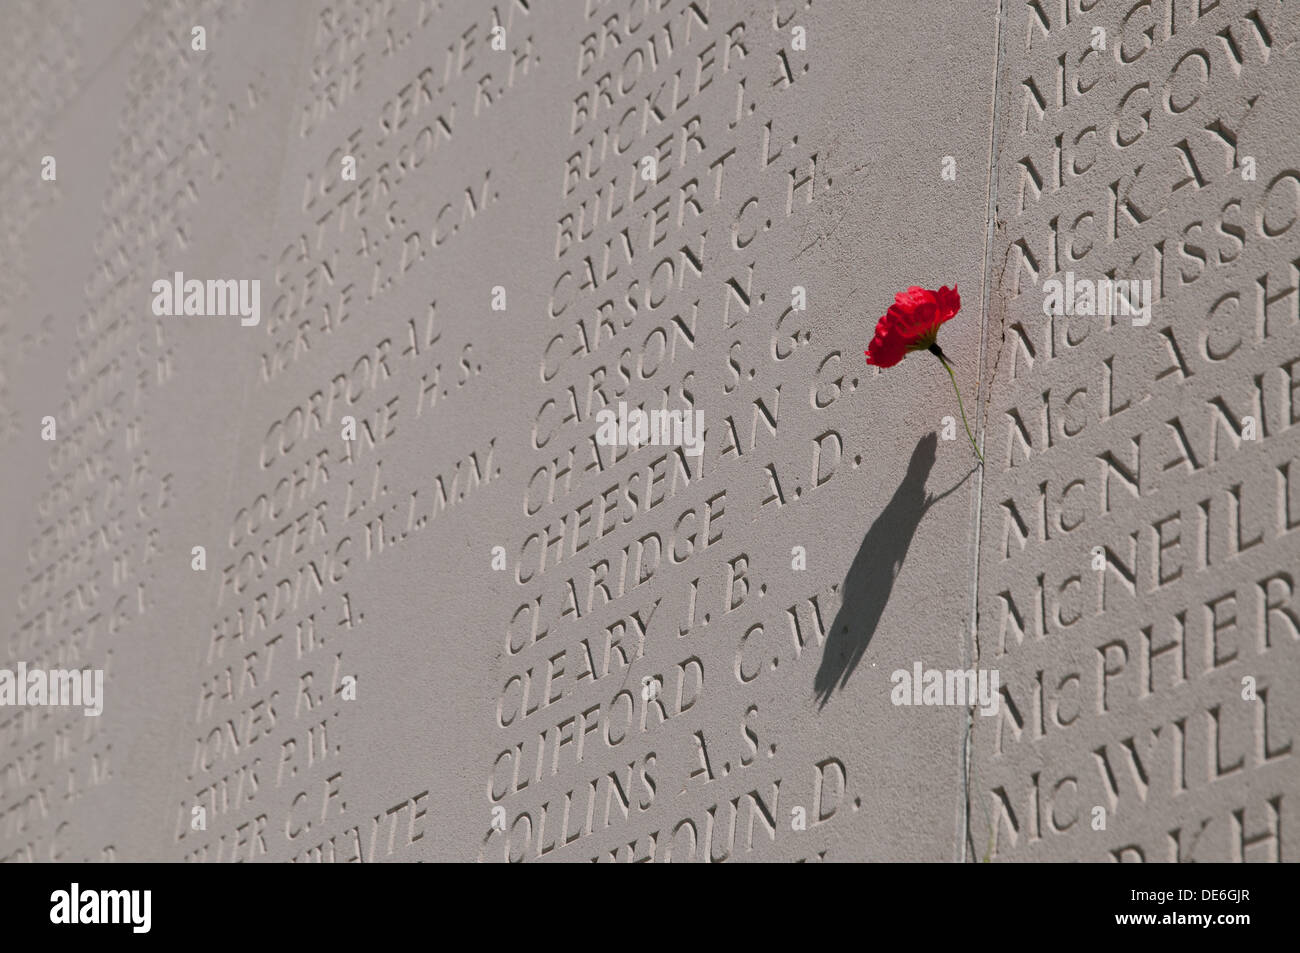 Poppy attached to name on wall engraved with names of the missing, Australian National War Memorial, Villers-Bretonneux, Somme Stock Photo